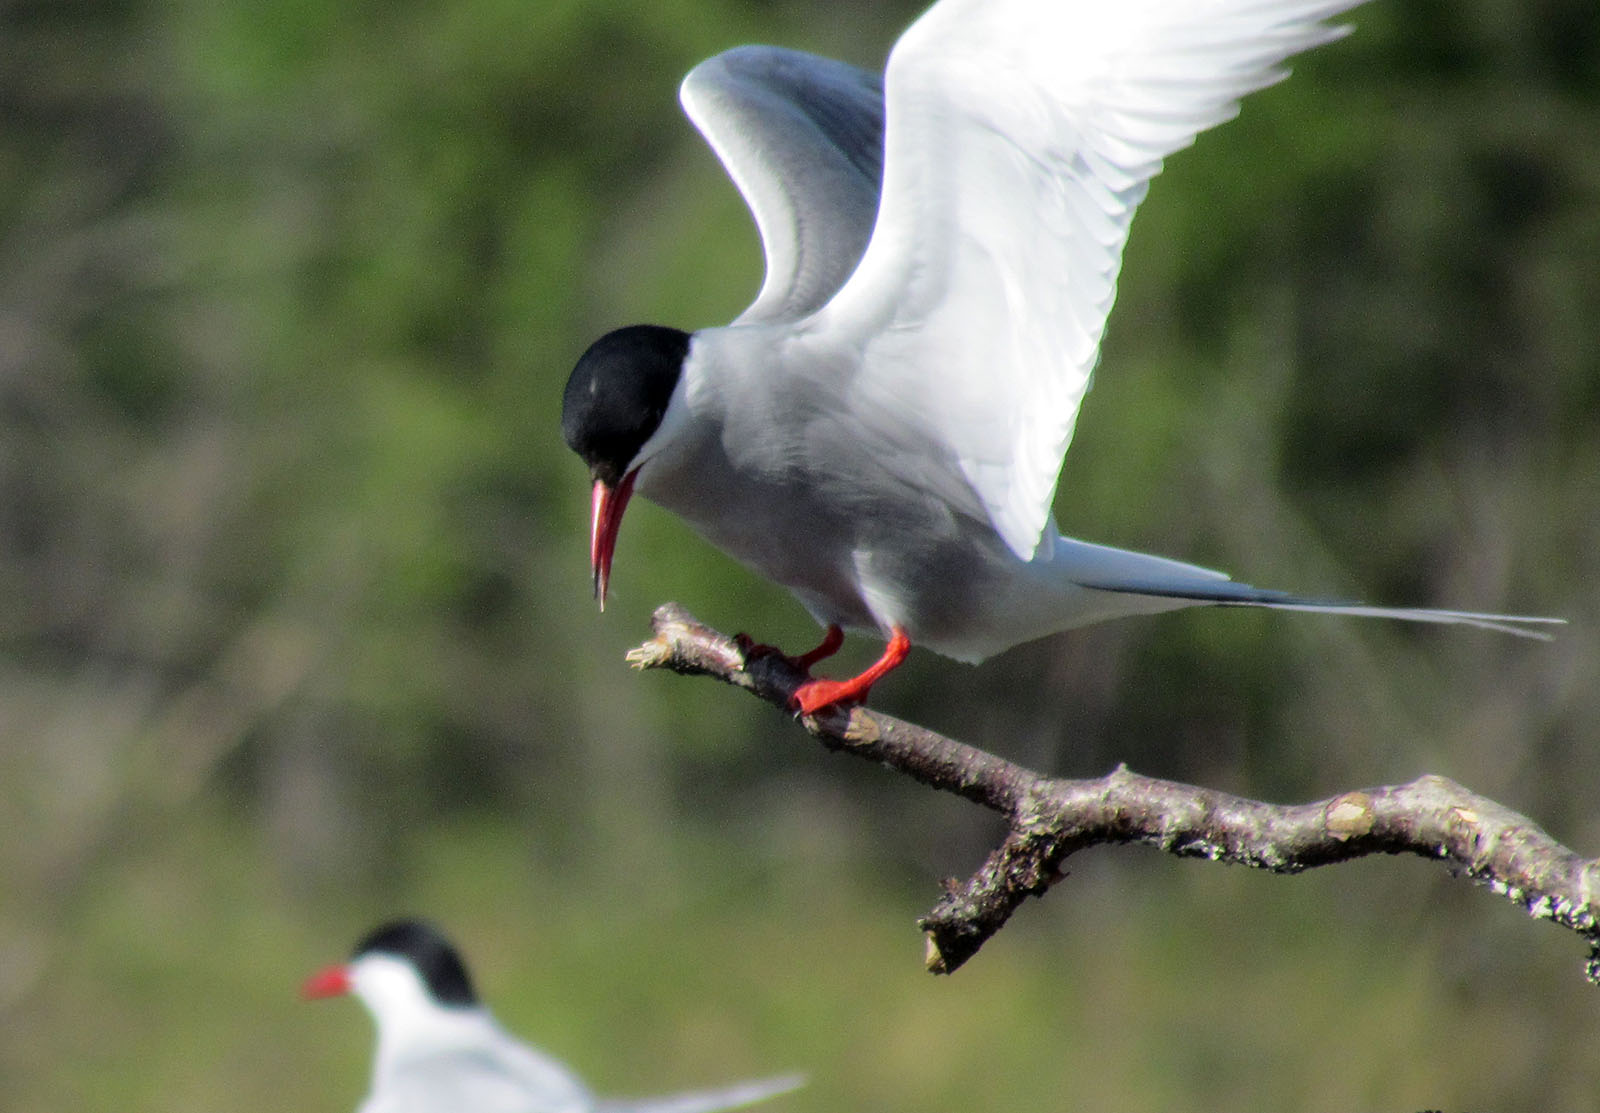 View arctic terns and other migratory birds in Alaska during a Rafting Tour on Alaska's Willow Creek